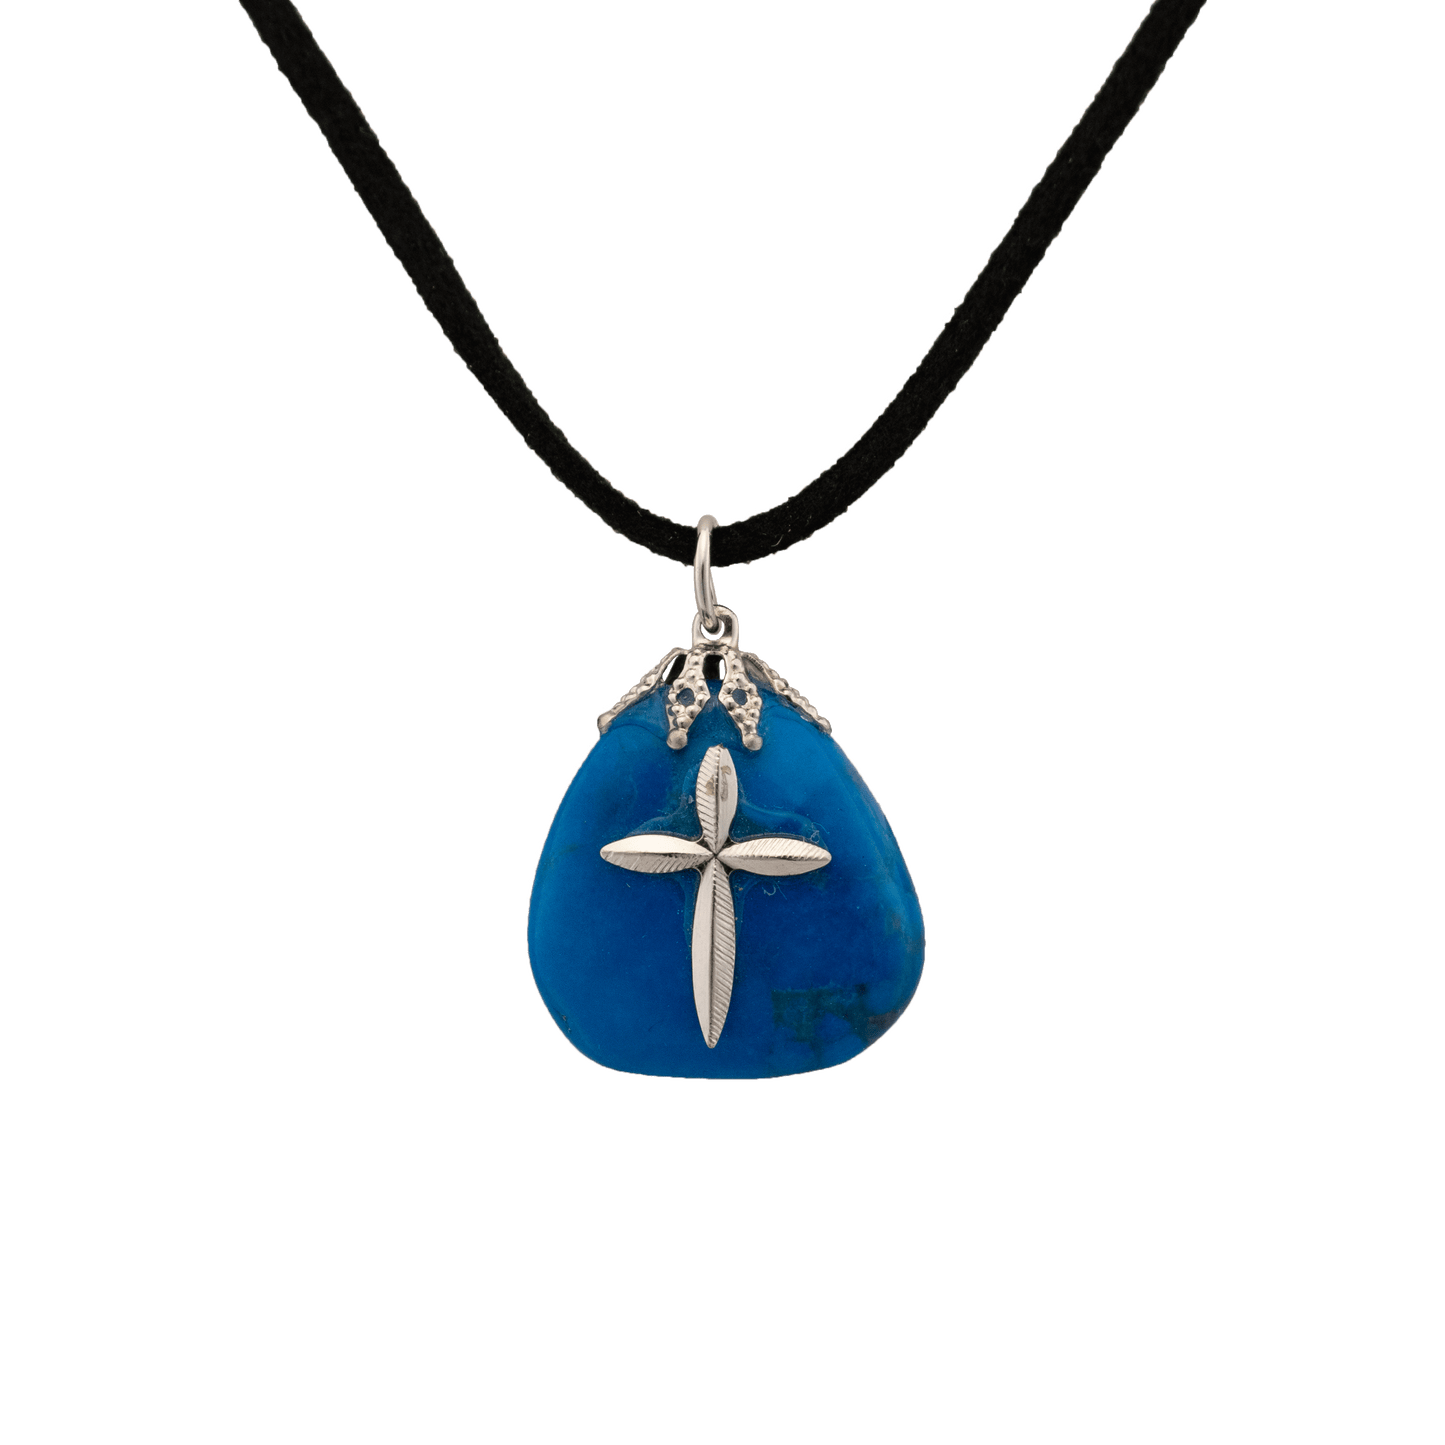 Blue Howlite stone pendant with silver leaf cross in the center on a black cord